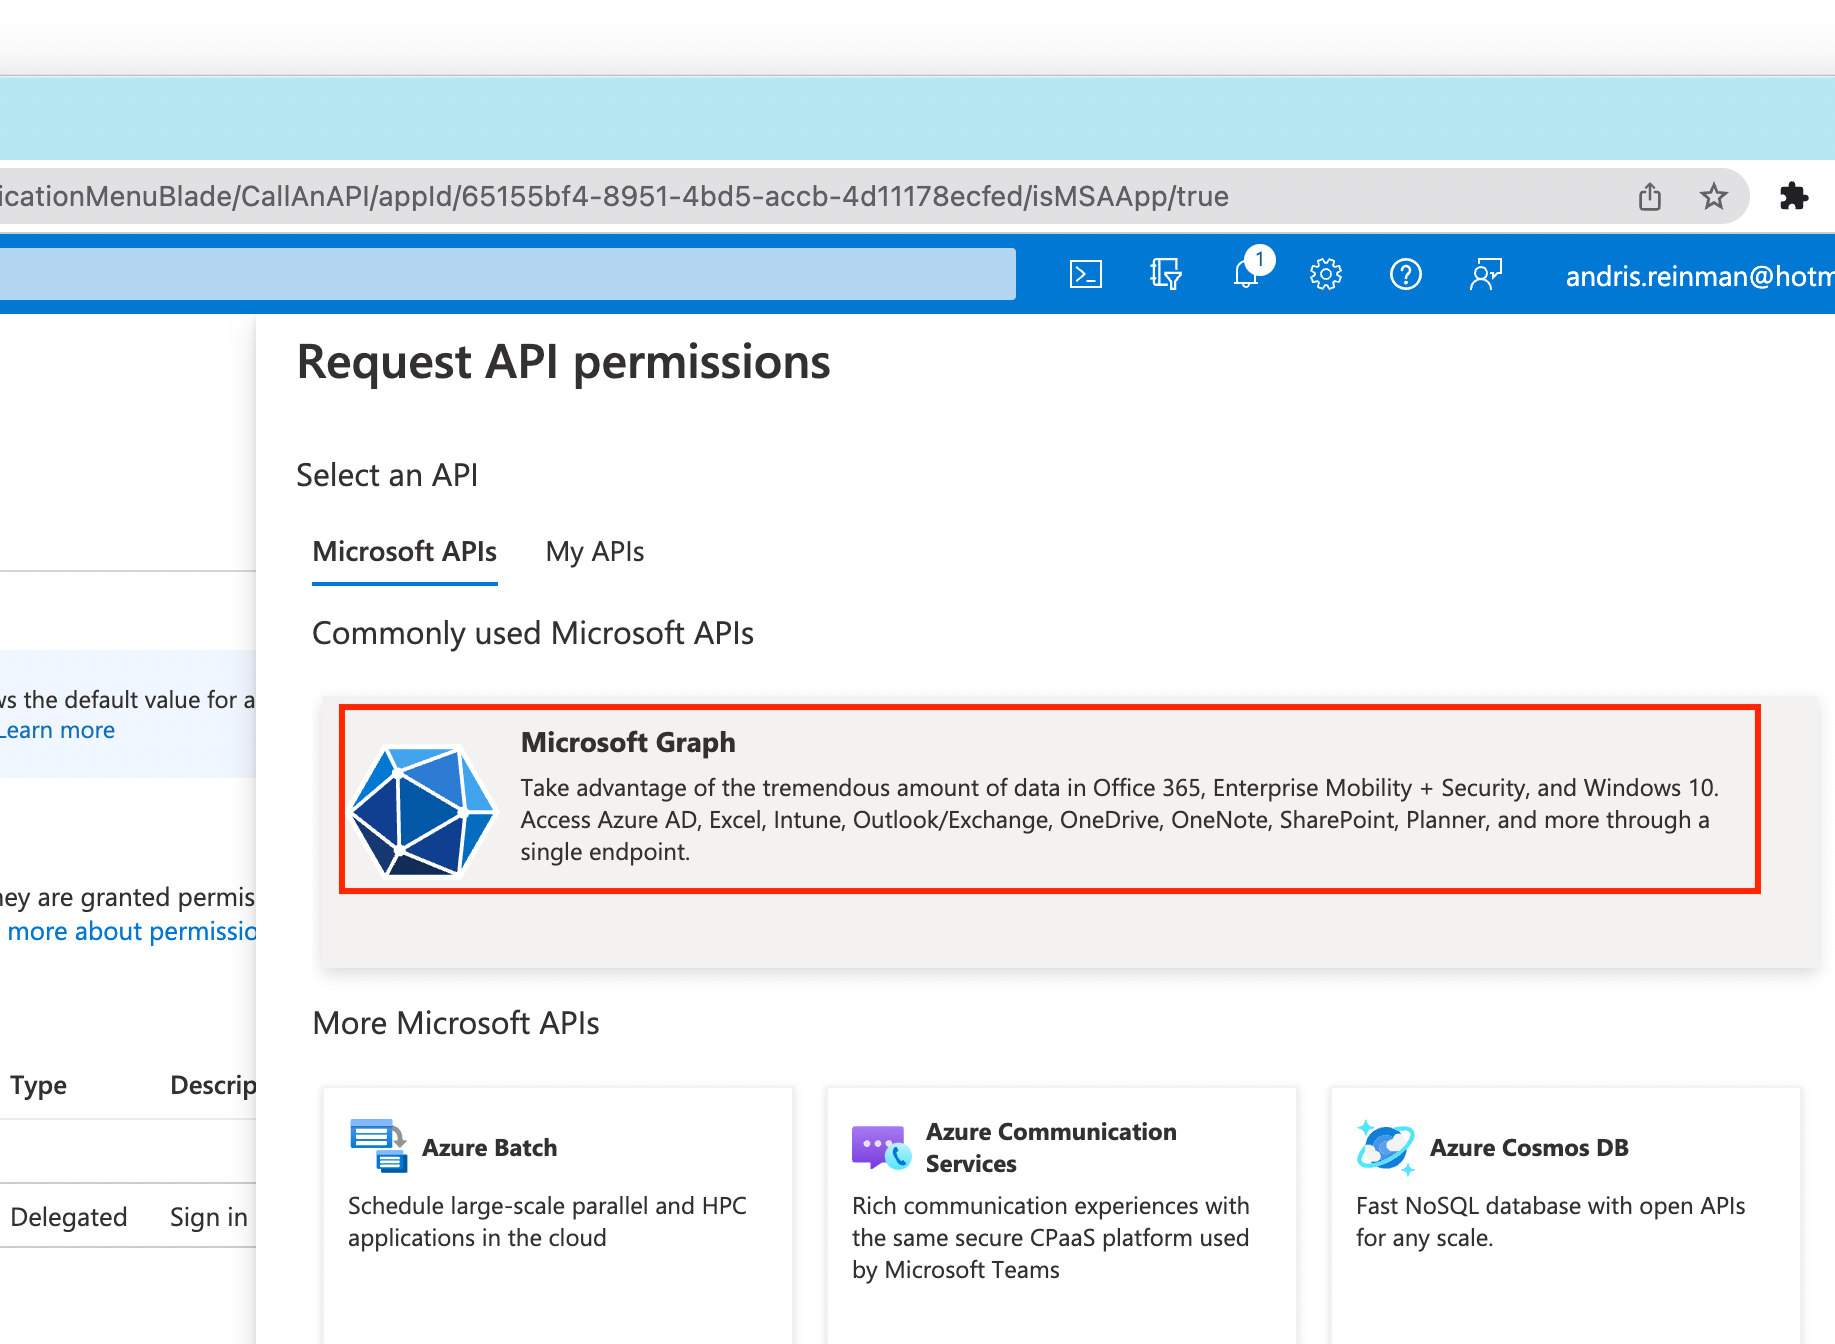 Setting up OAuth2 with Outlook